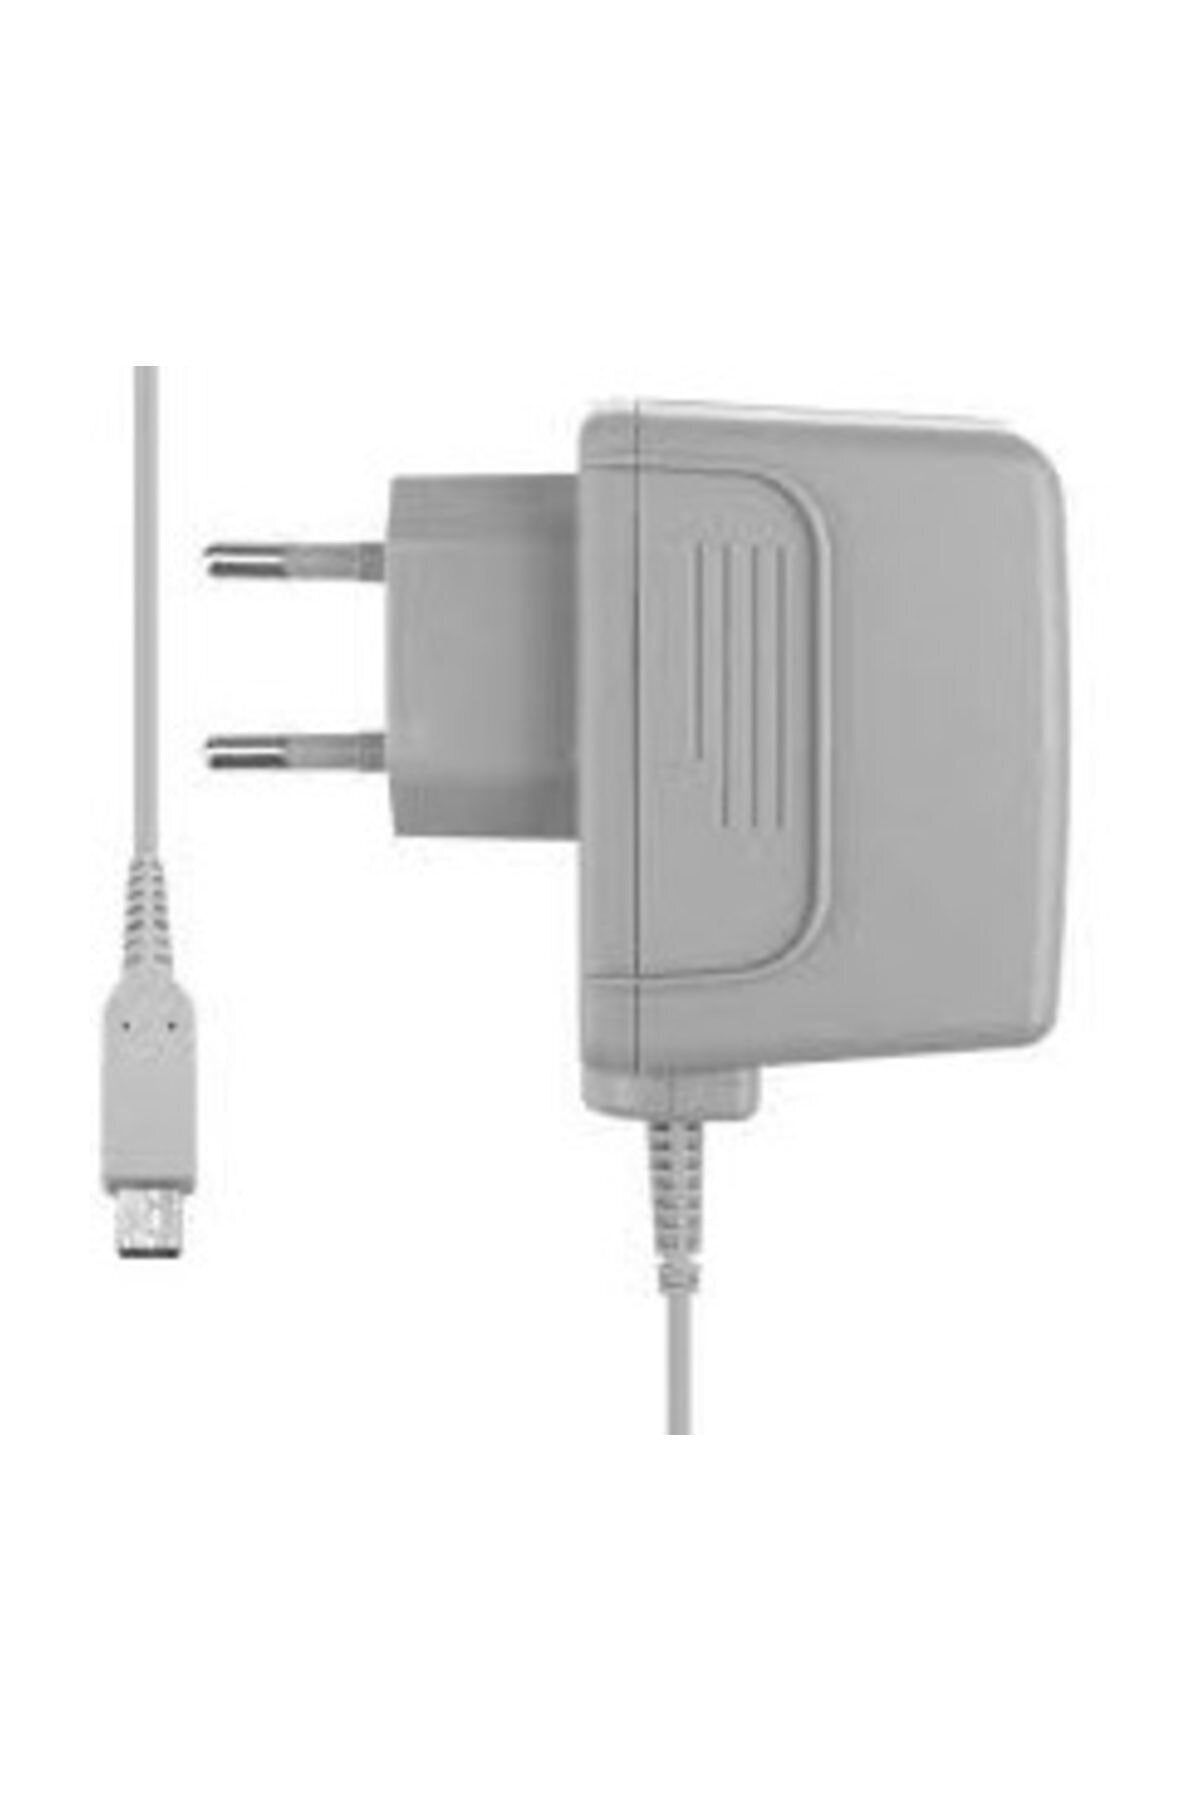 Nintendo For New 3ds ll 3ds AC ADAPTER